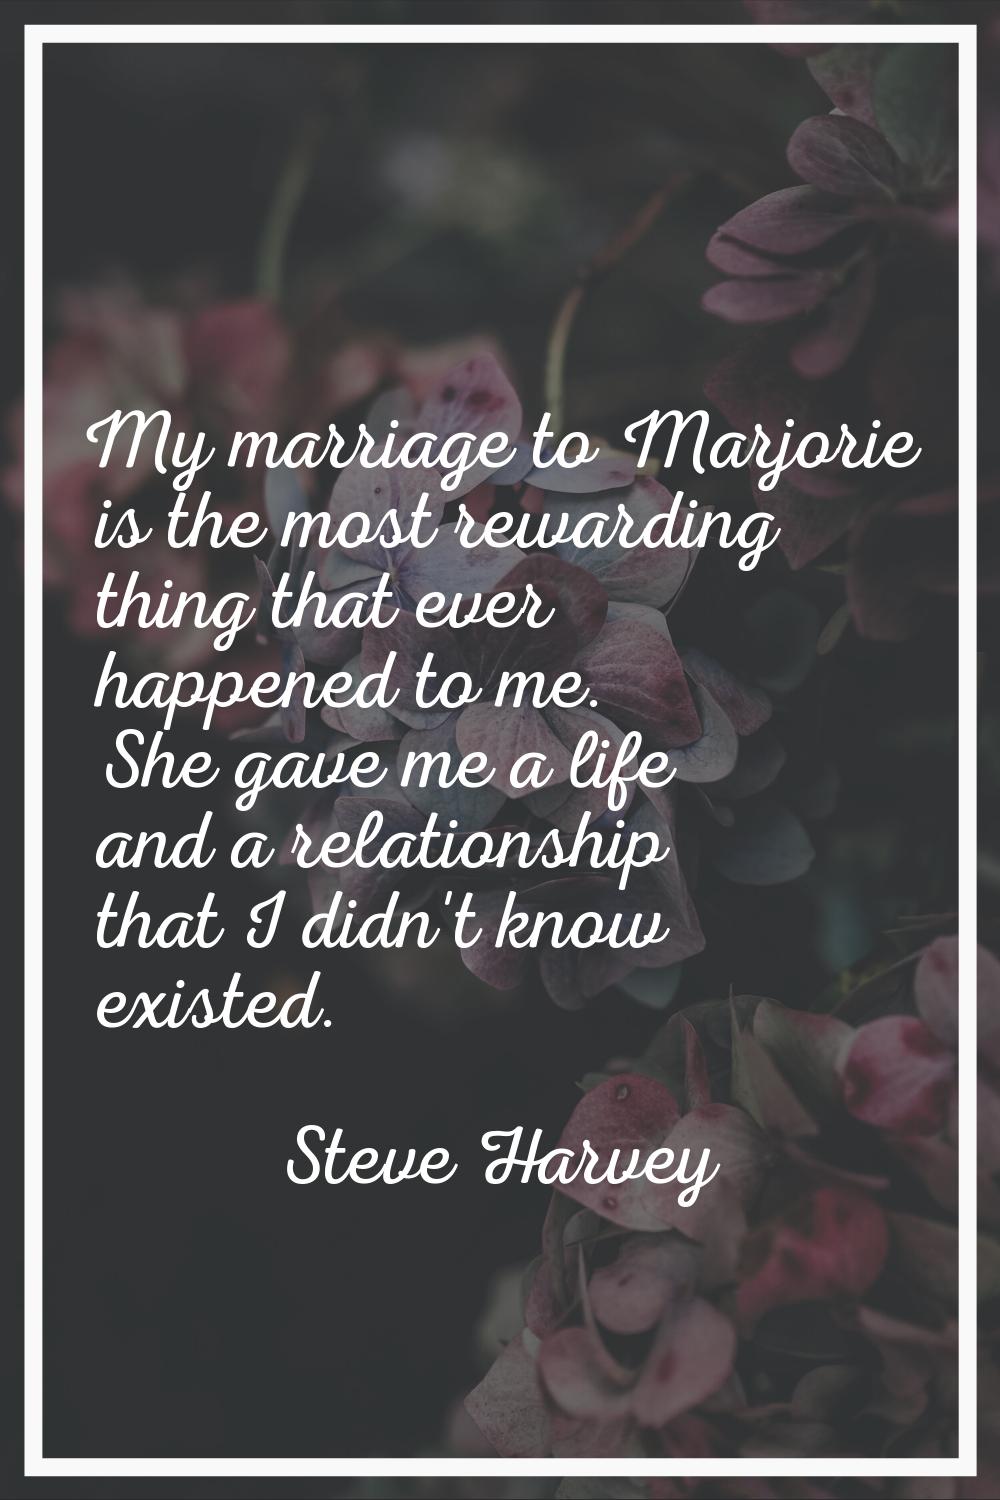 My marriage to Marjorie is the most rewarding thing that ever happened to me. She gave me a life an